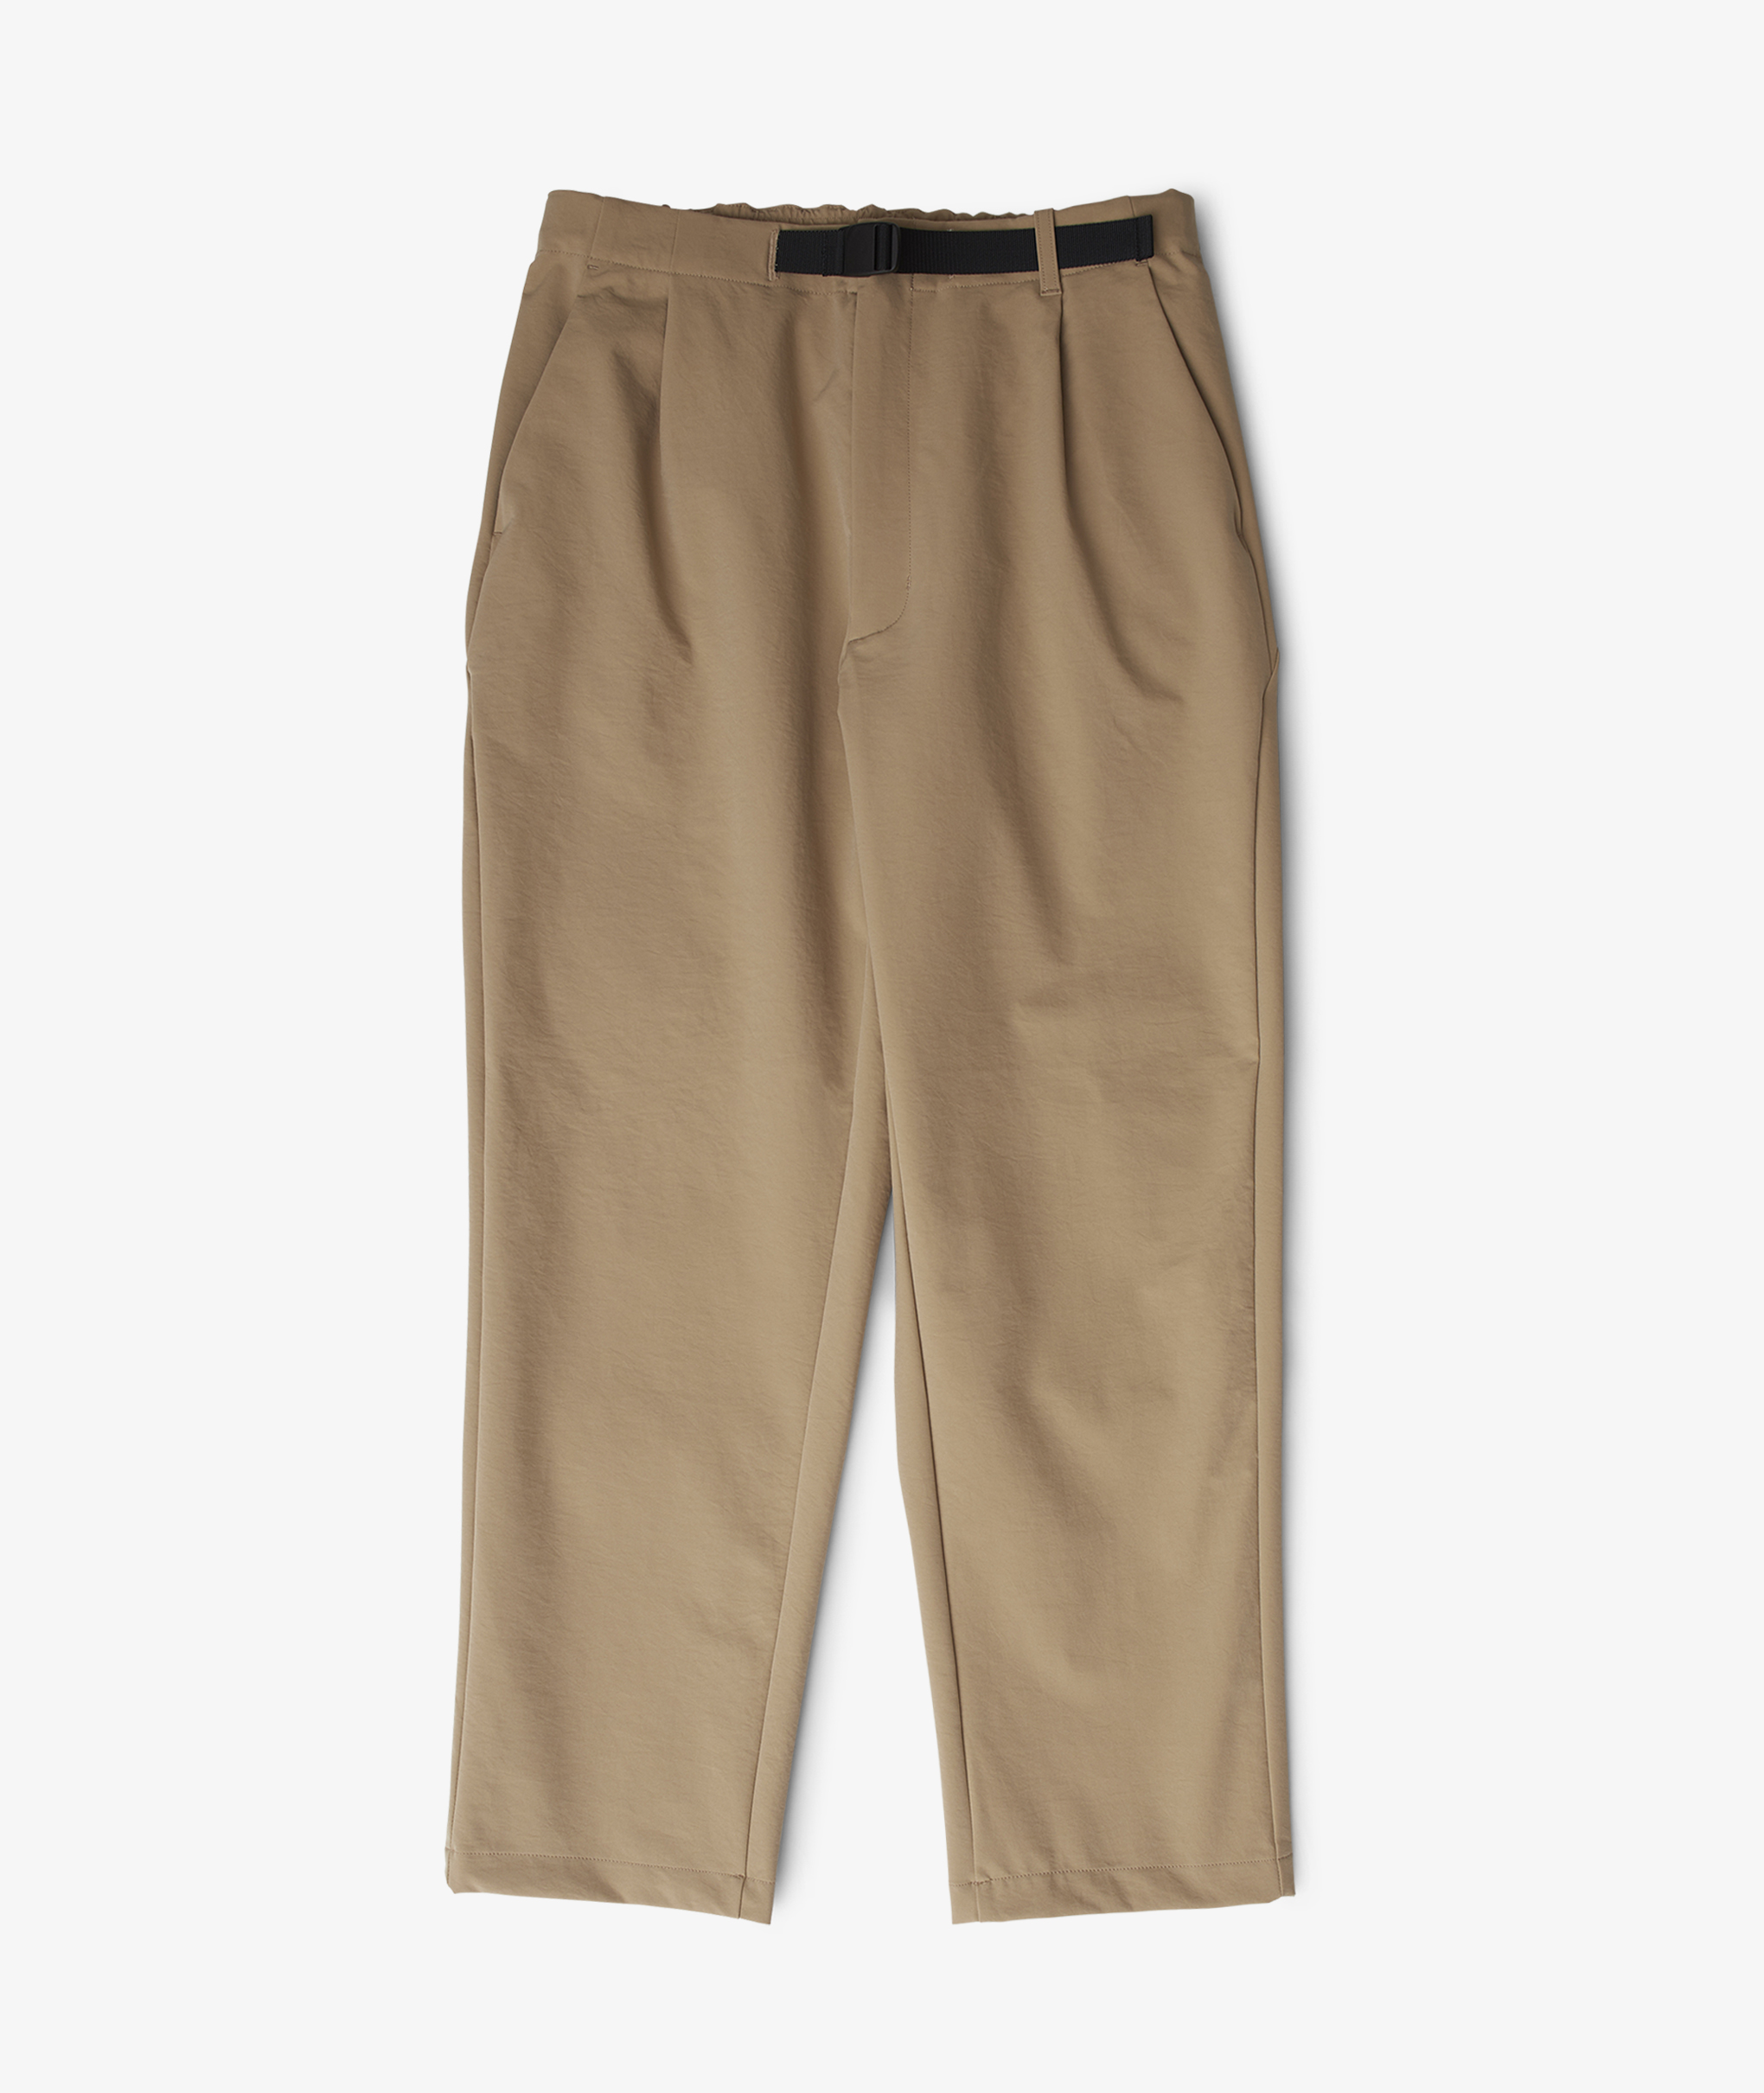 Norse Store  Shipping Worldwide - Goldwin One Tuck Tapered Stretch Pants -  Clay Beige